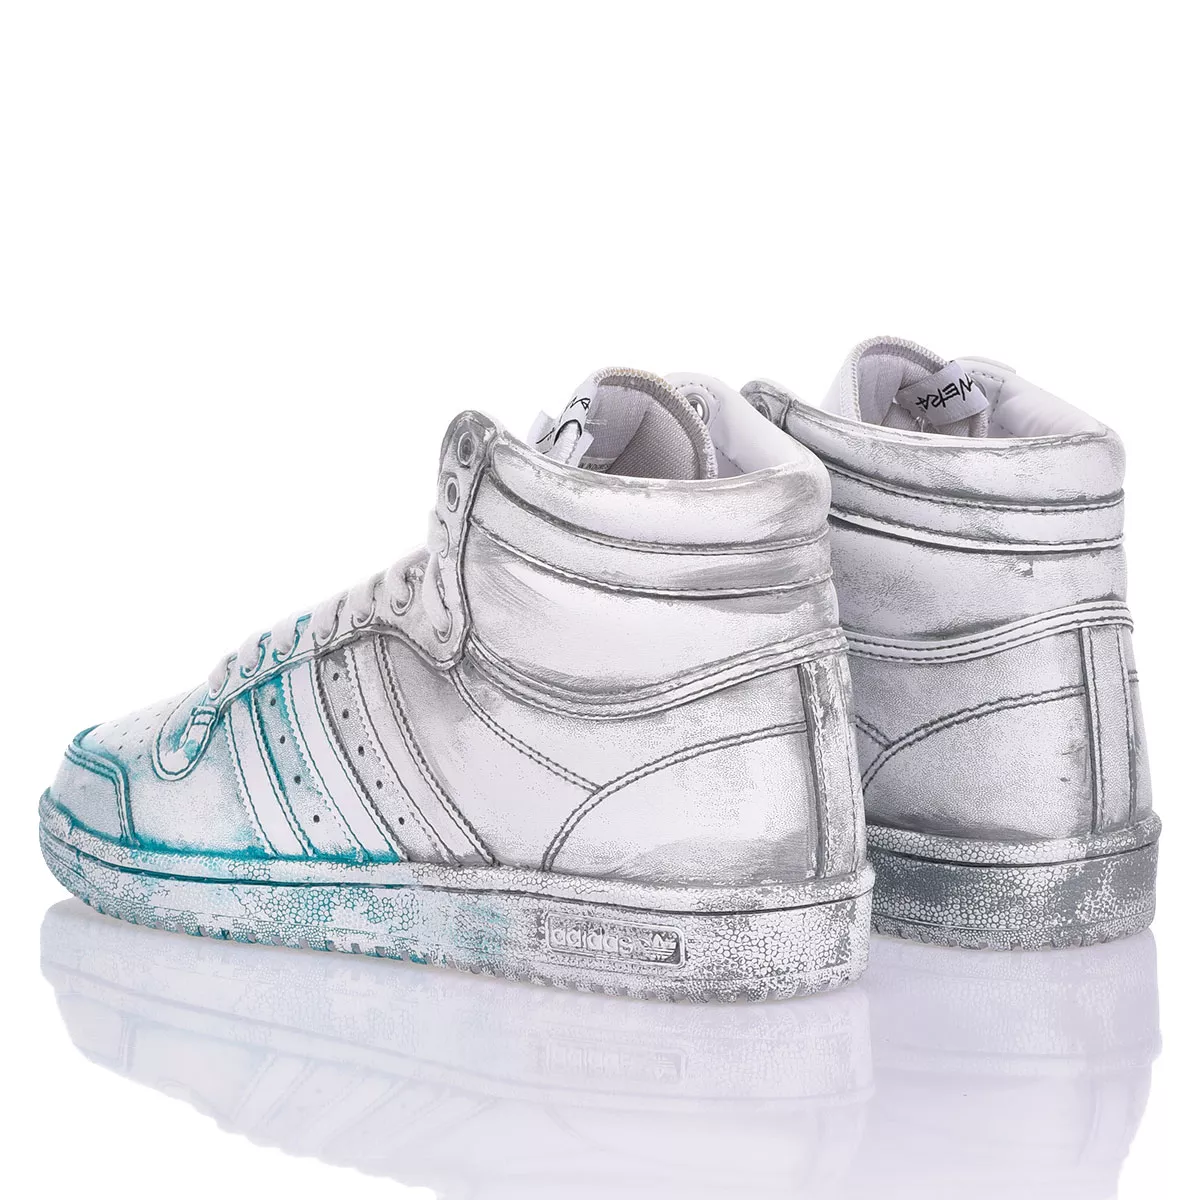 Adidas Top Ten Ice  Washed-out